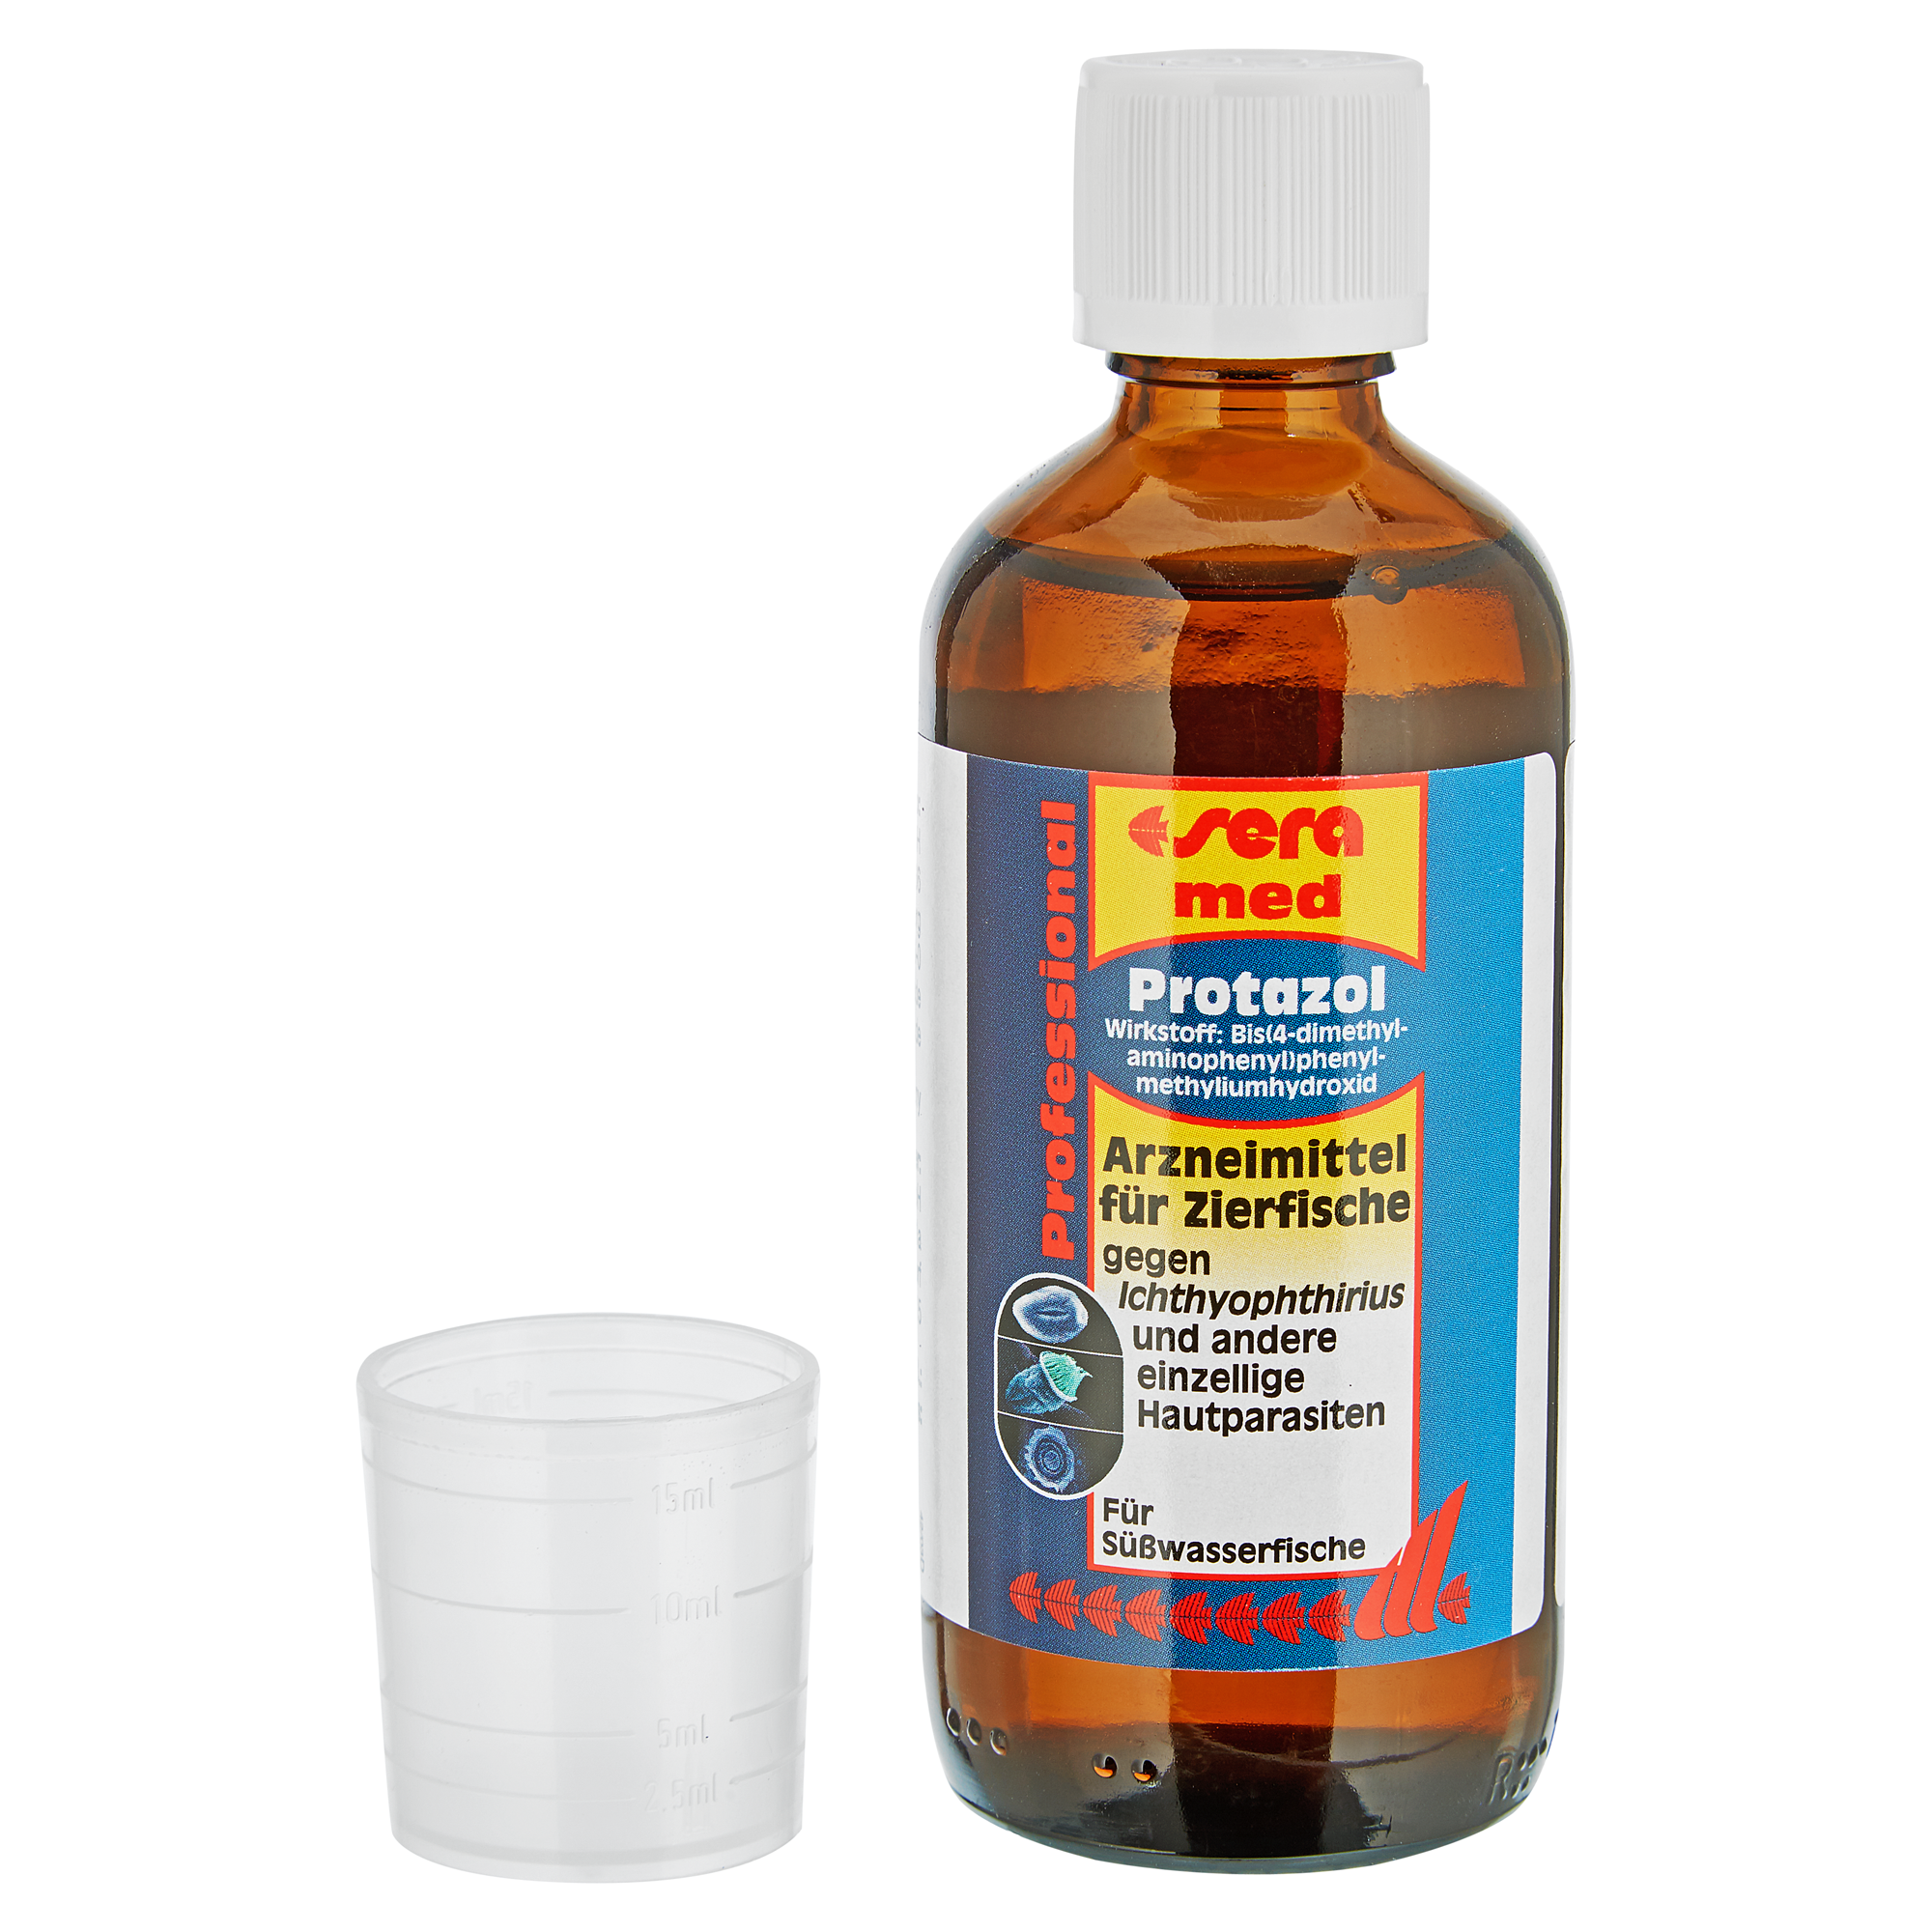 Fischarznei "Protazol" 100 ml + product picture